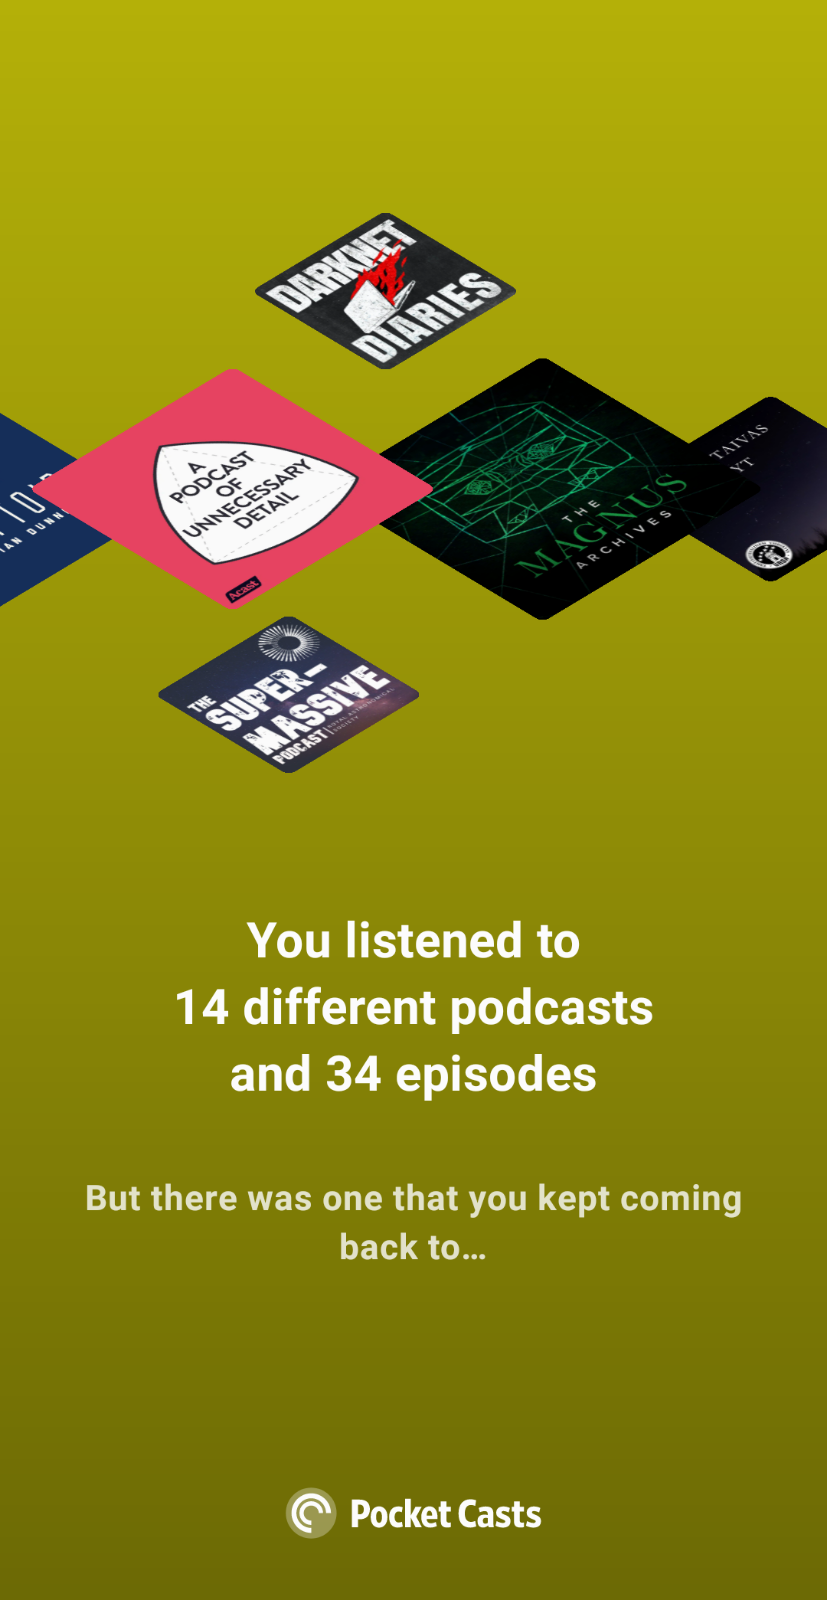 You listened to 14 different podcass and 34 episodes. But there was one that you kept coming back to...